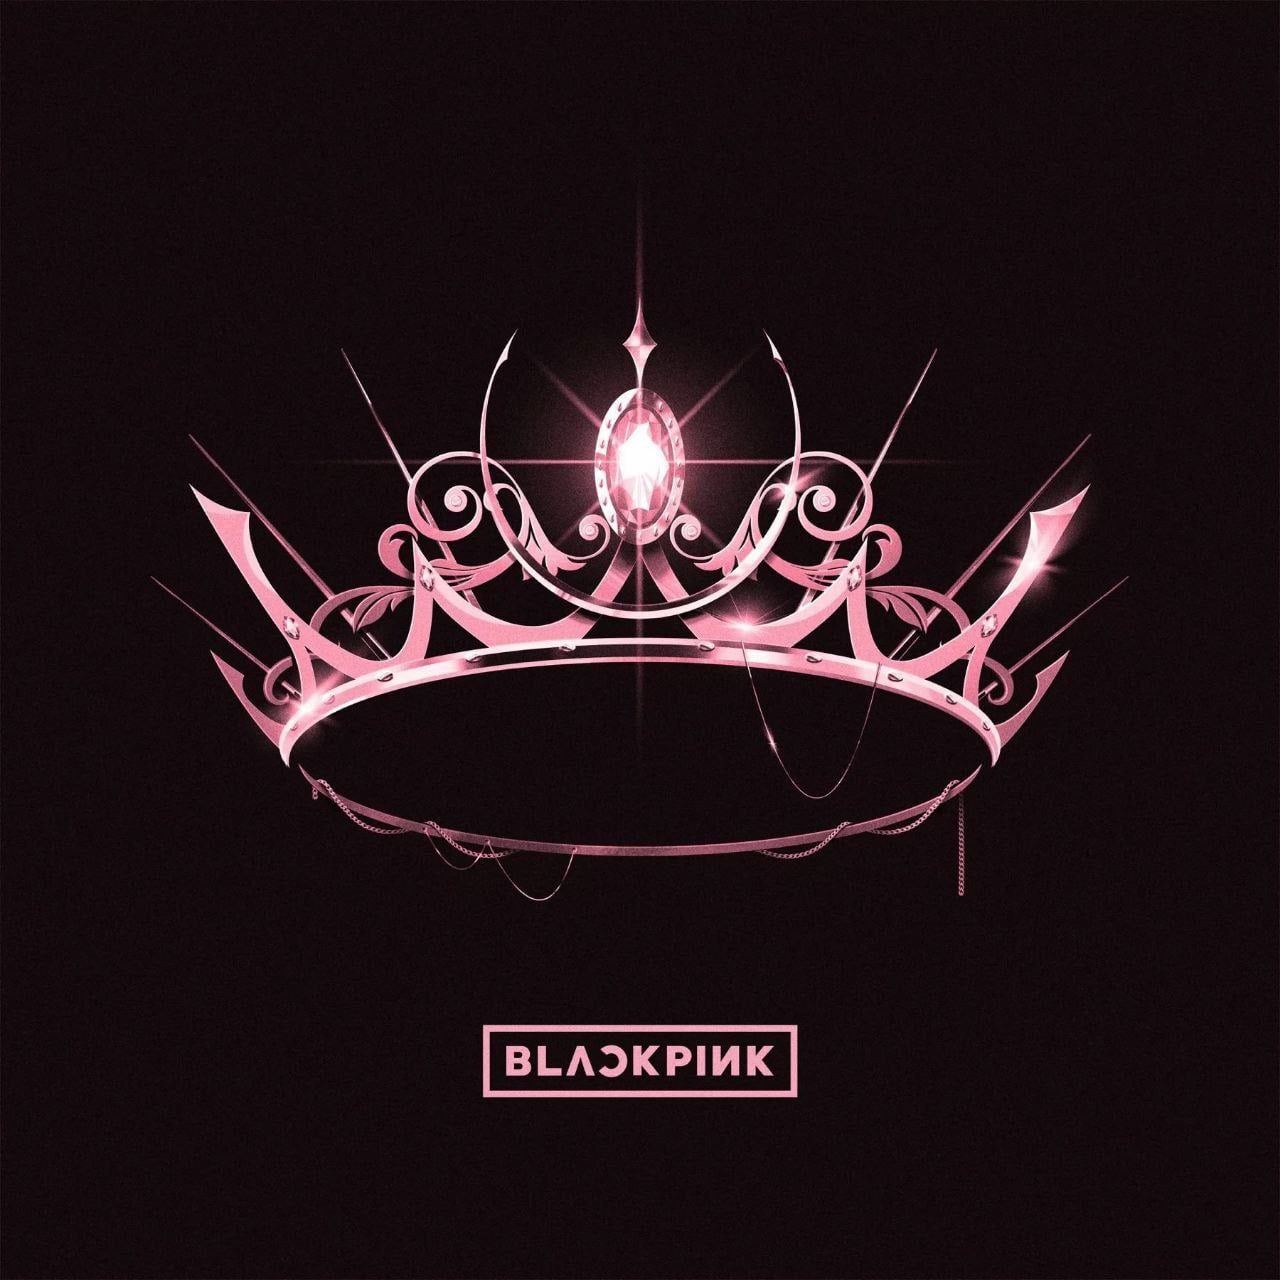 231118 Blackpink Update News-BLACKPINK's 'The Album' (3.084 billion) surpasses BTS's 'LY Tear' (3.083 billion) to become the fourth most streamed studio album by a kpop artist///Source of information (the author checks the information)-https://t.me/kpopuanevs